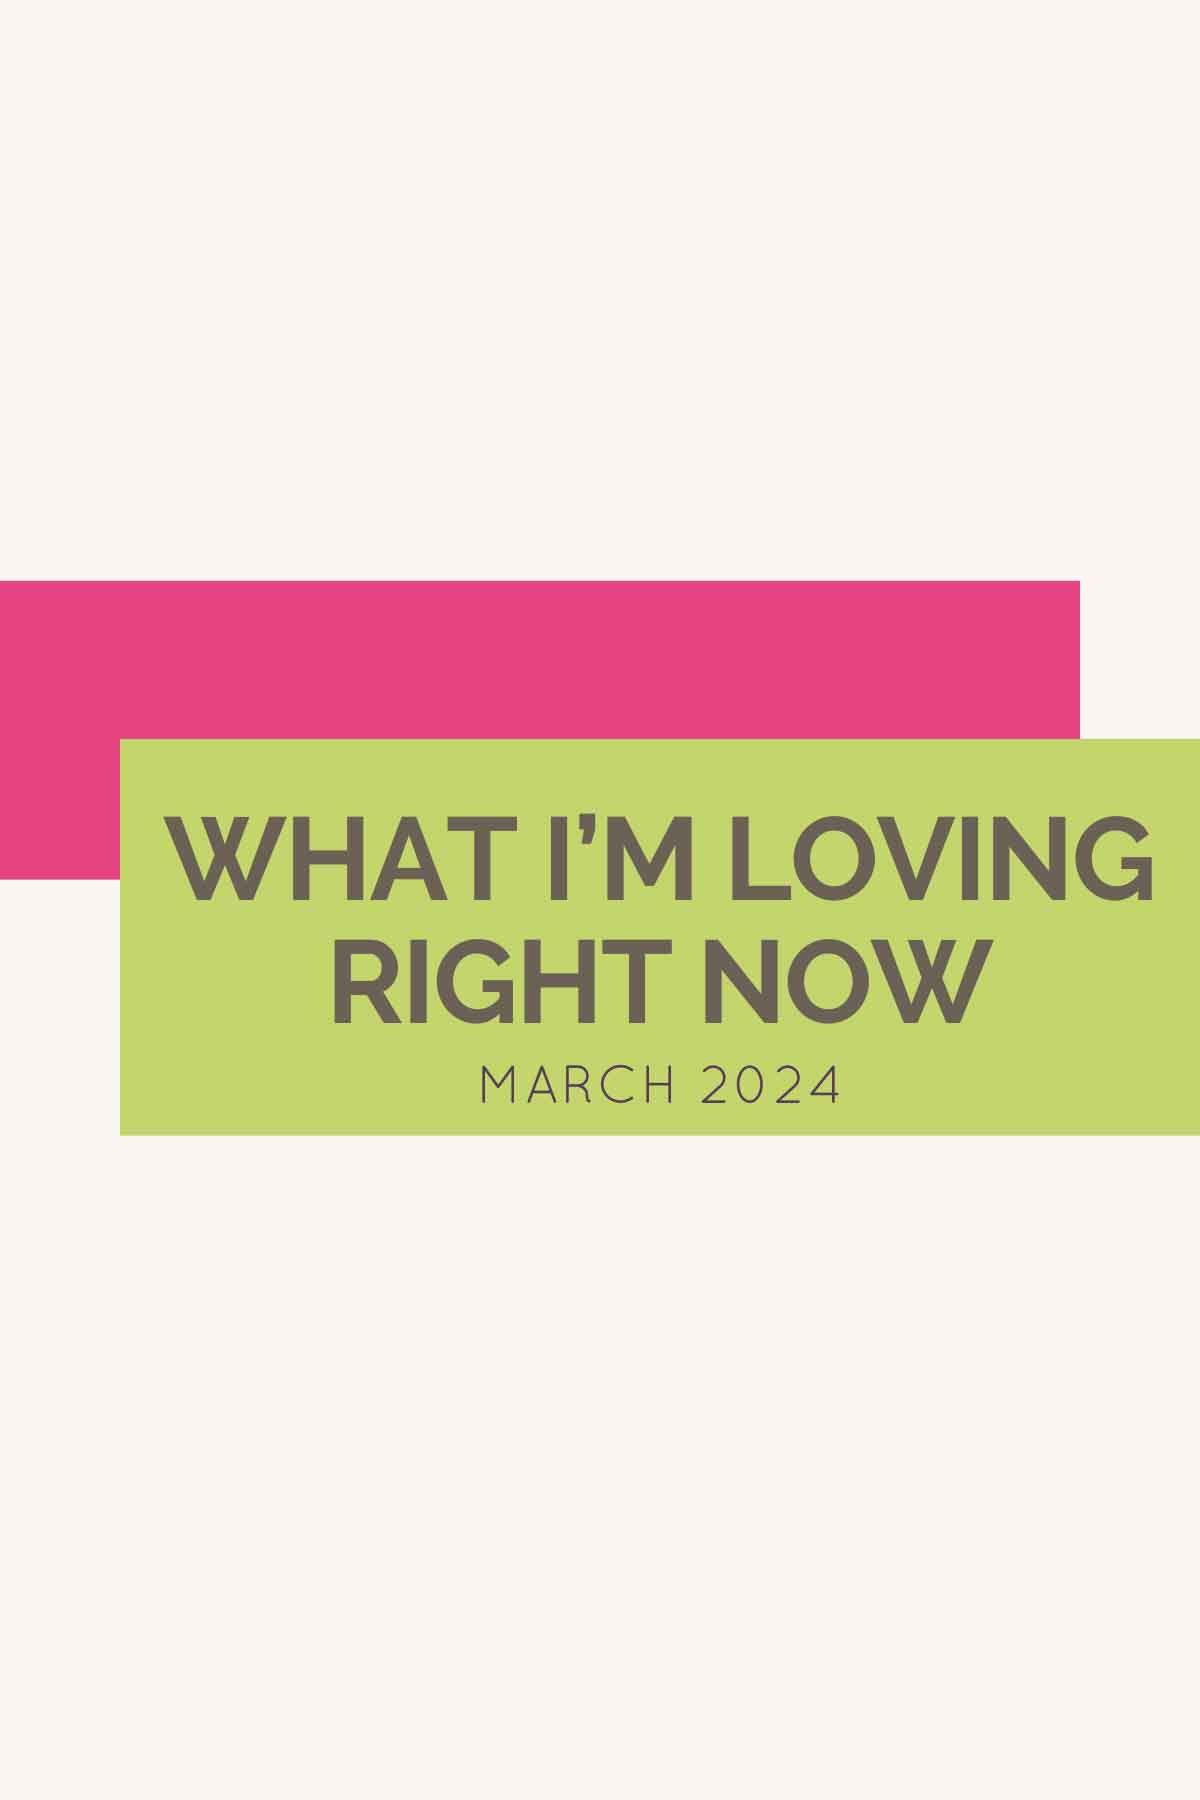 Pink and green overlapping rectangle boxes with text "What I'm Loving Right Now March 2024".